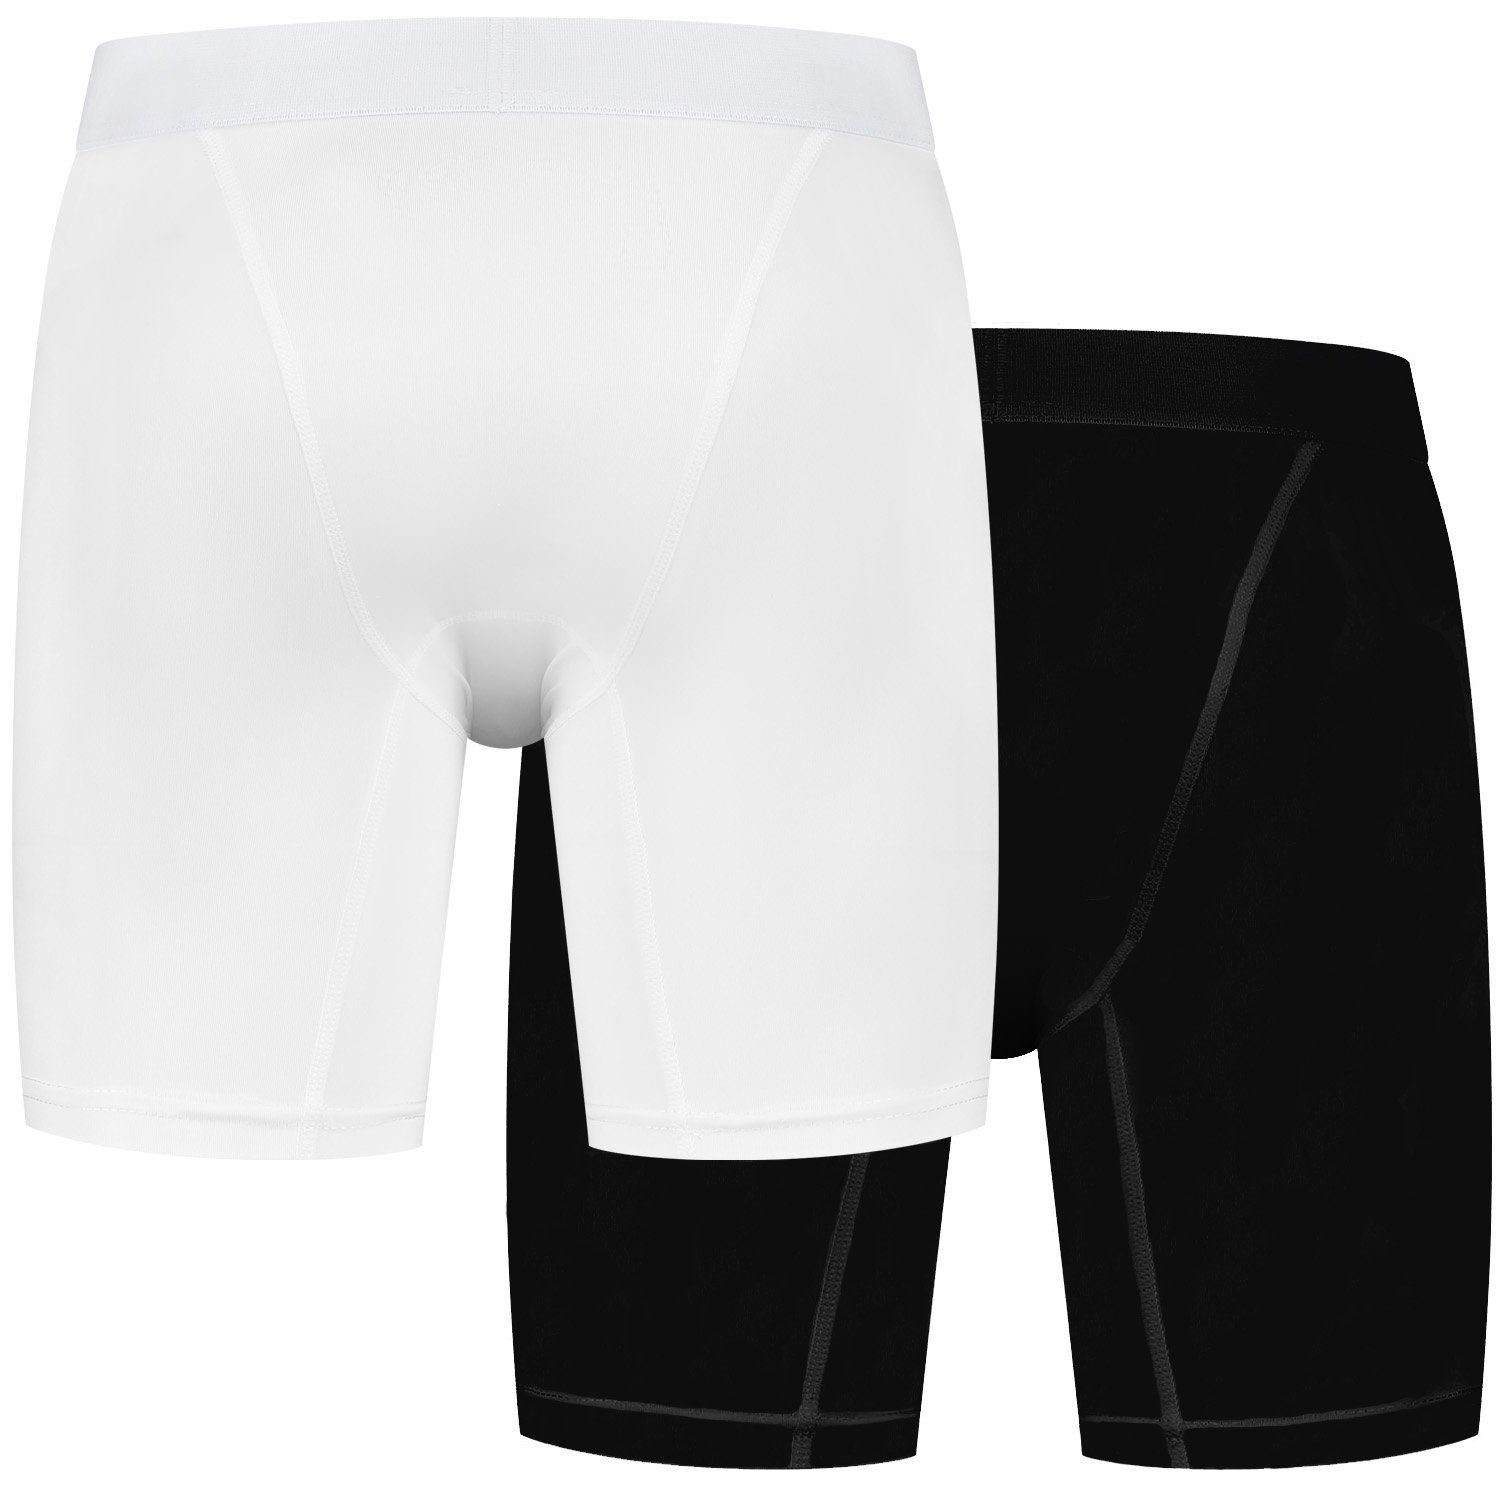 gladiator sports mens compression shorts in black and white back